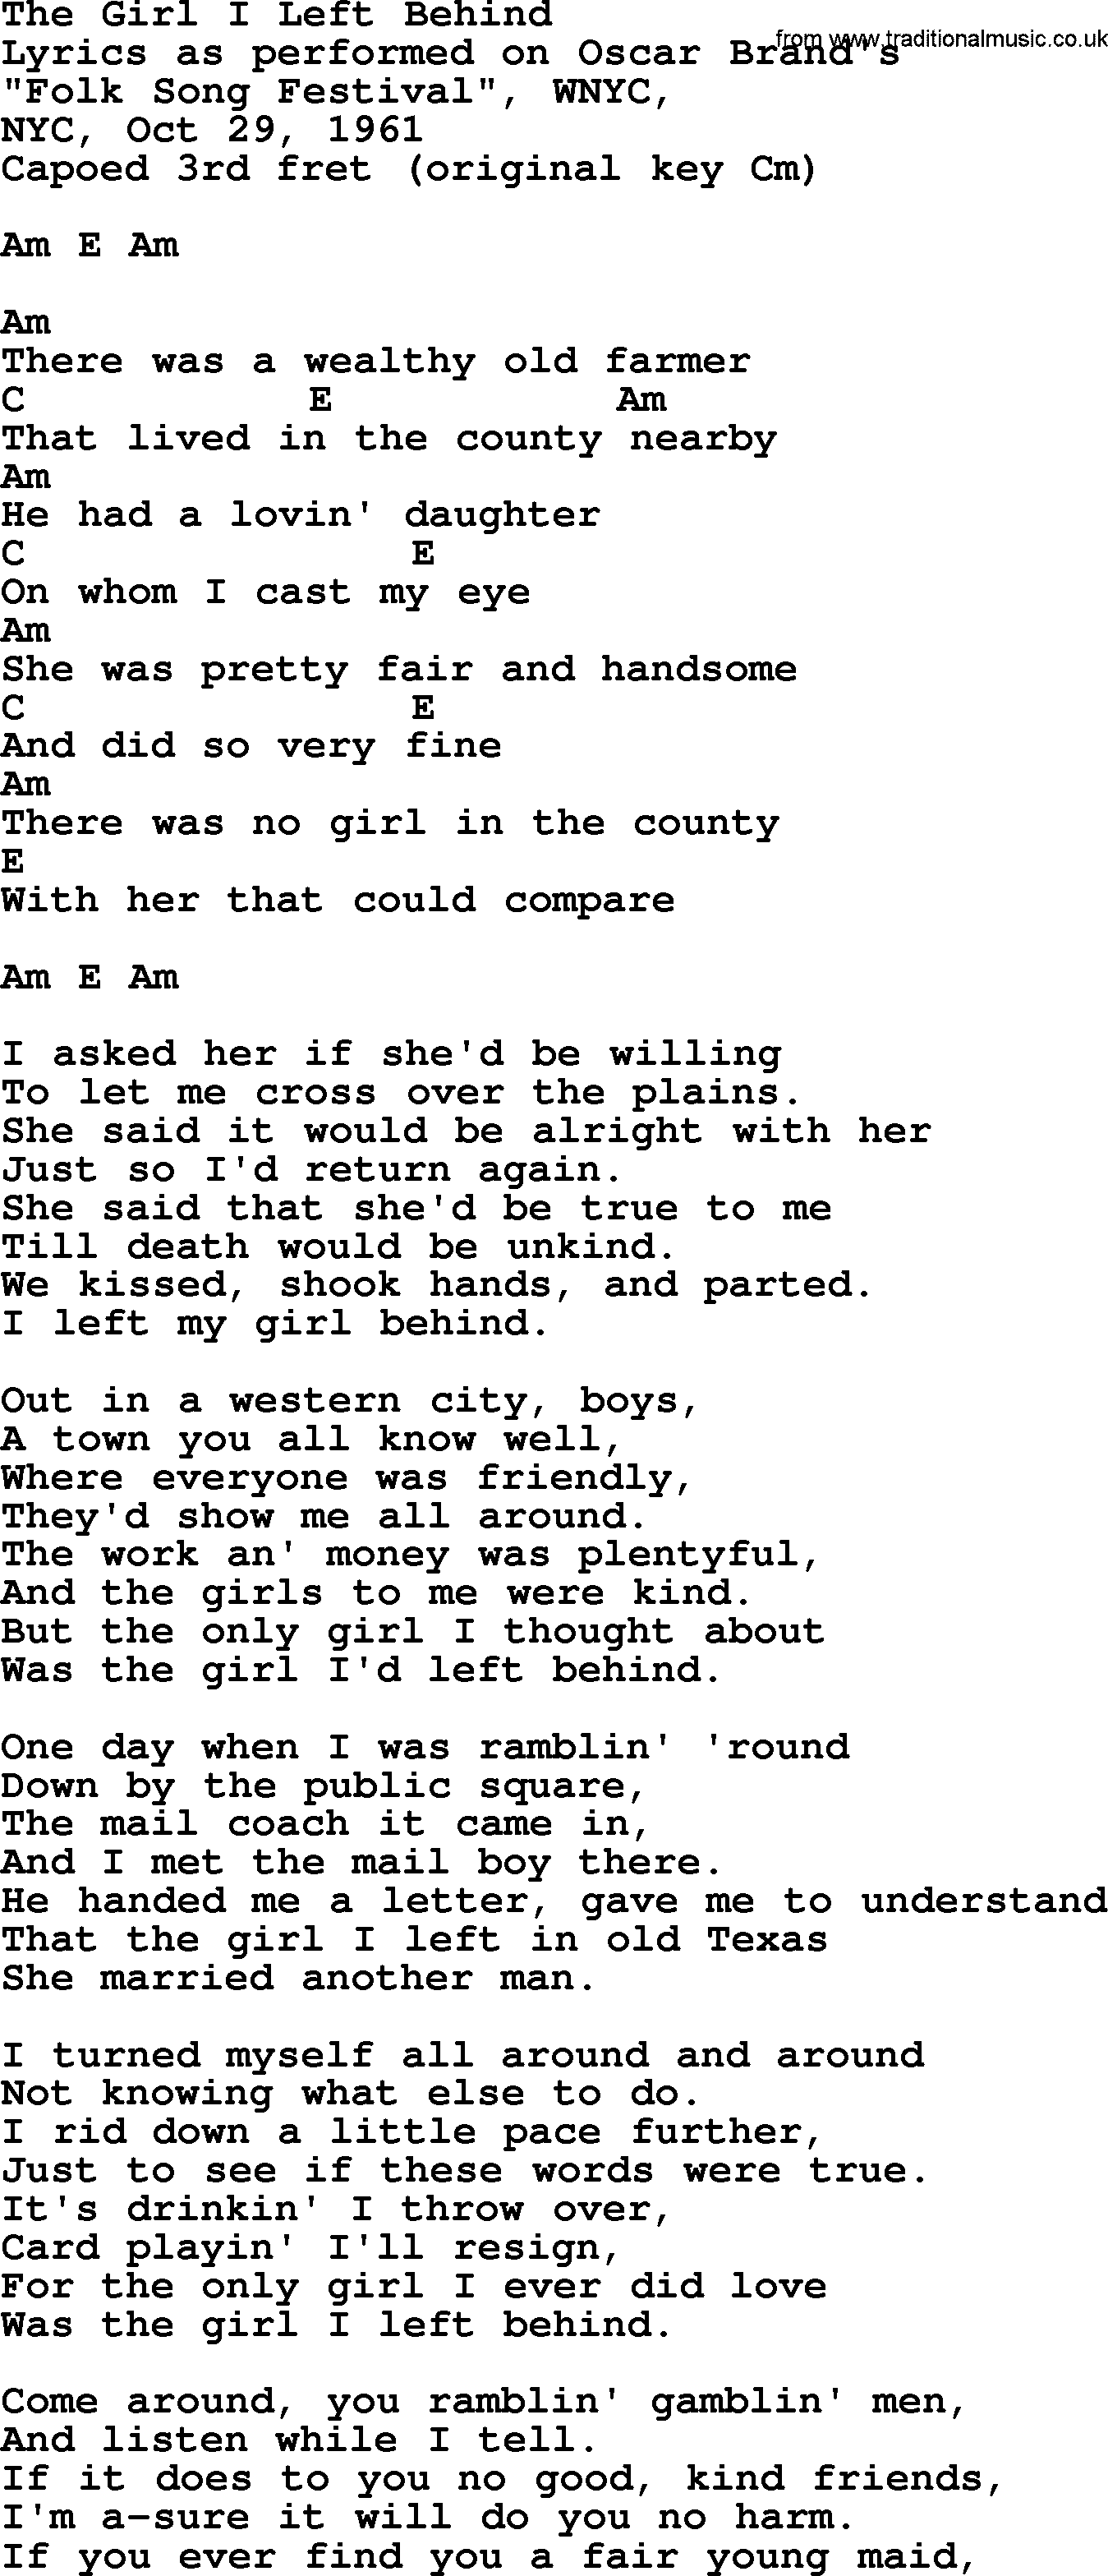 Bob Dylan song, lyrics with chords - The Girl I Left Behind